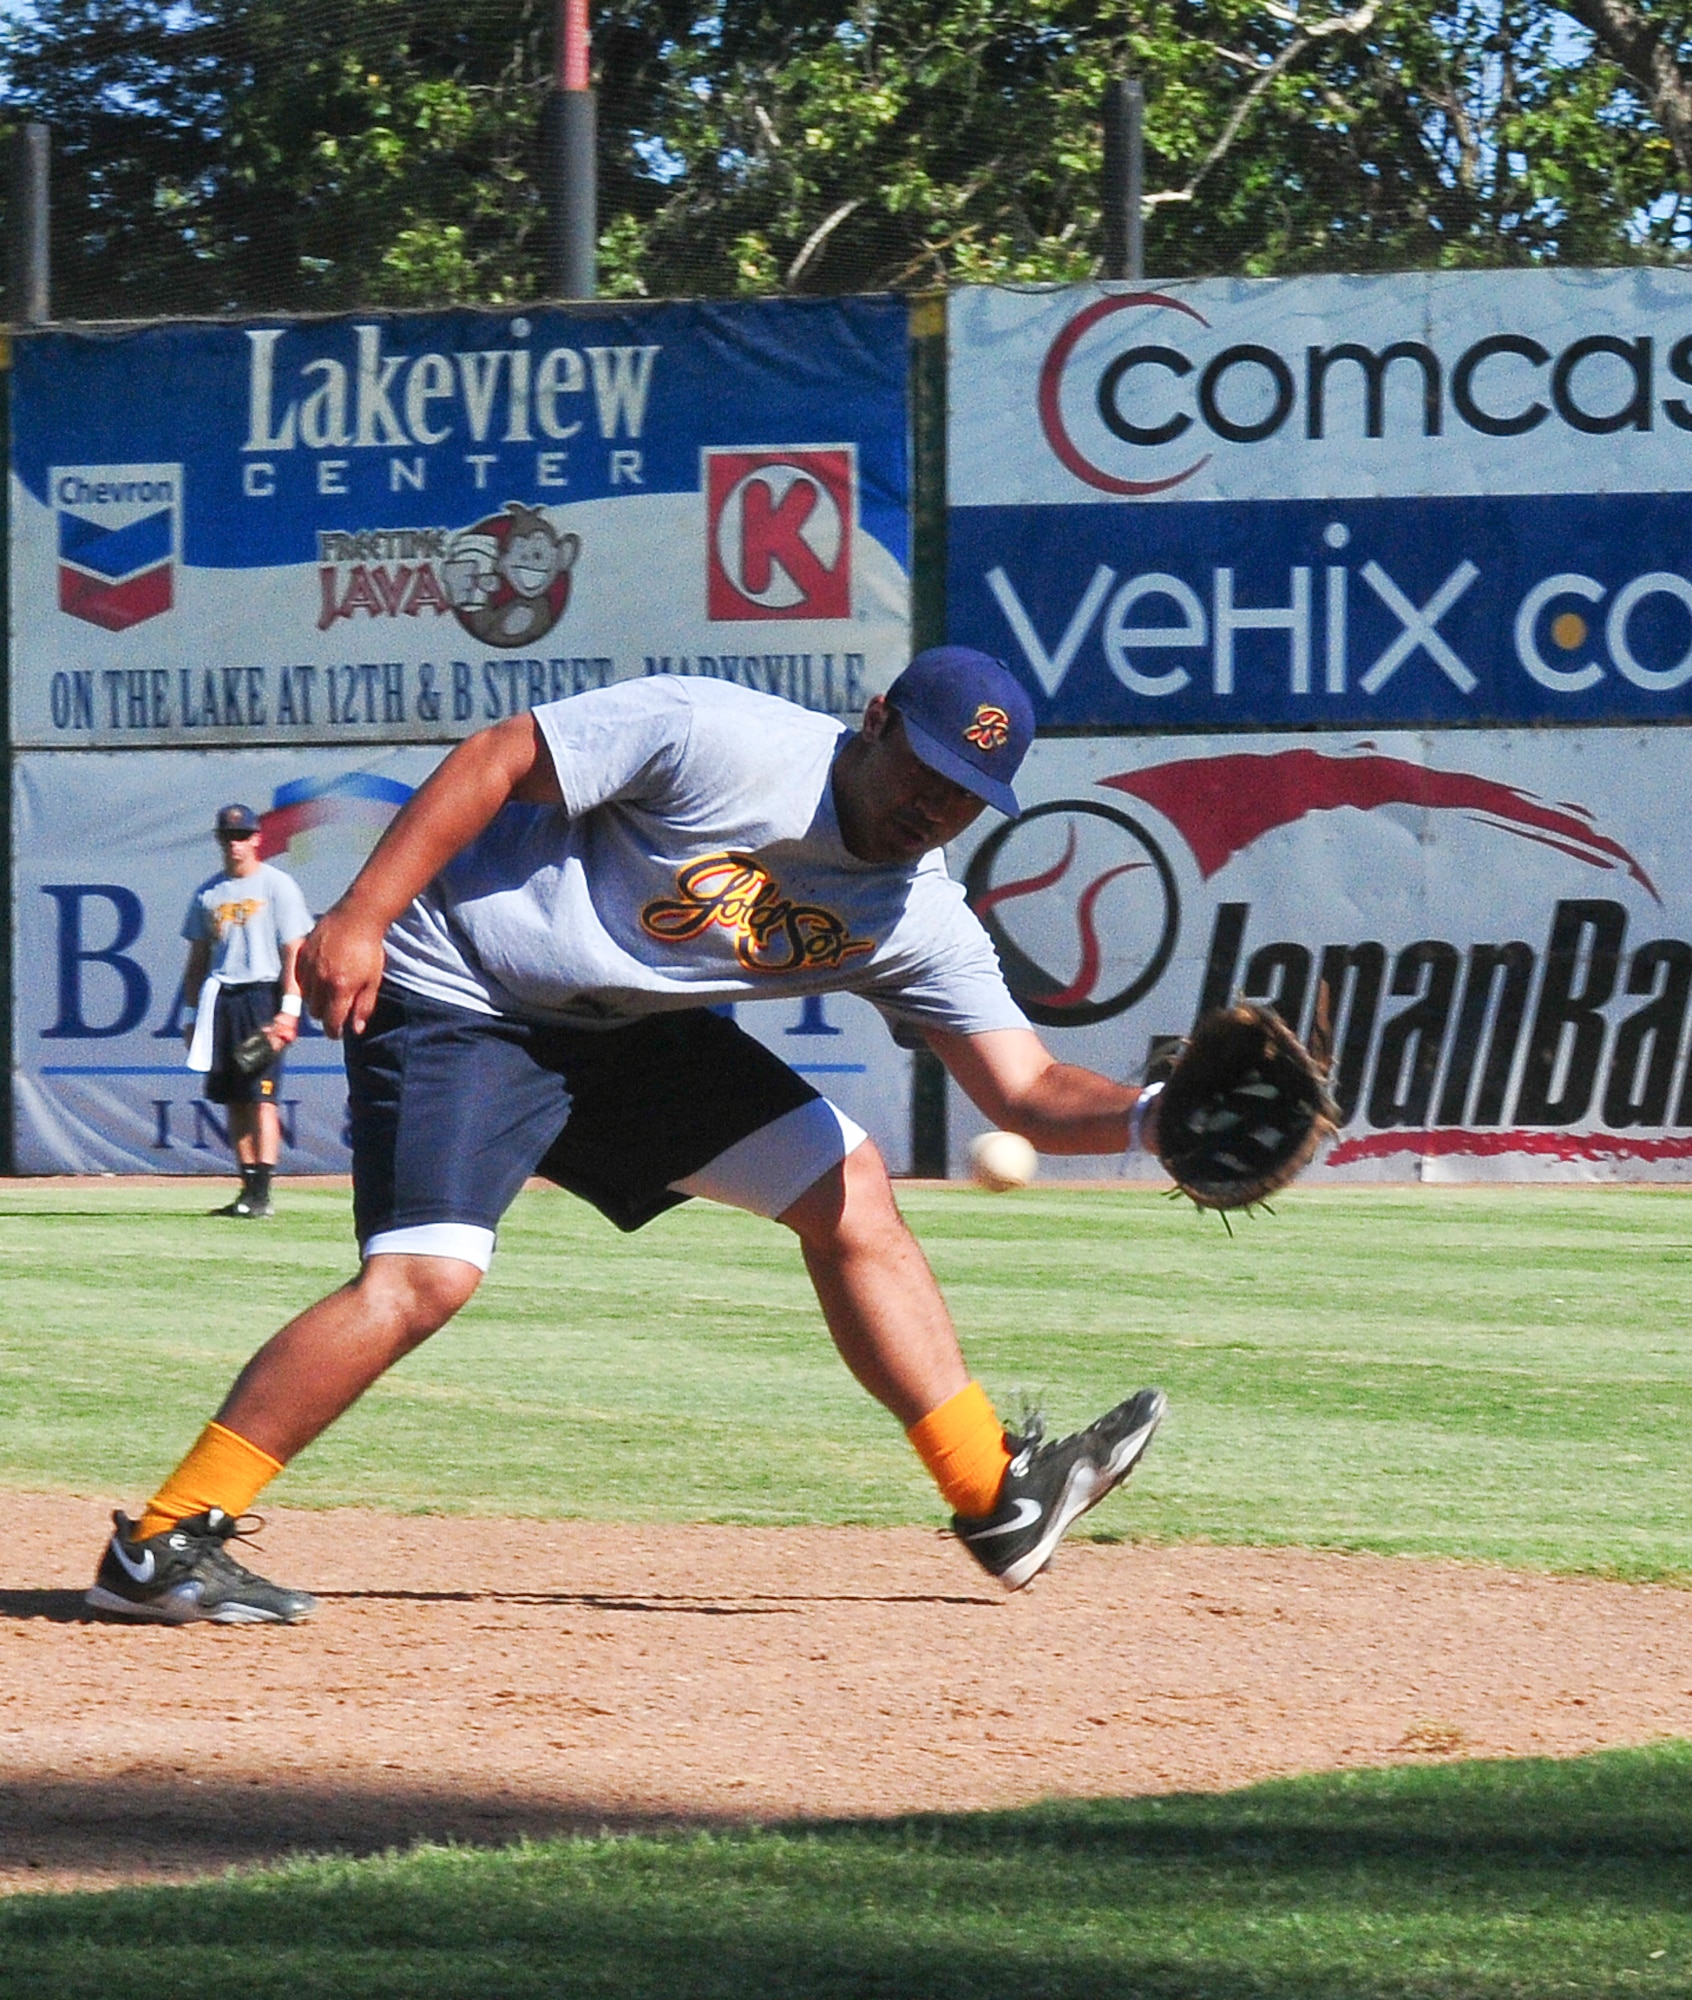 Air Force Academy Cadet Seth Kline fields a ground ball during pregame warm-ups at Appeal-Democrat Field in Marysville, Calif. July 5. Kline will be playing summer baseball with the Marysville Goldsox during his three week Operation Air Force tour here. (U.S. Air Force photo by Senior Airman Allen Pollard)